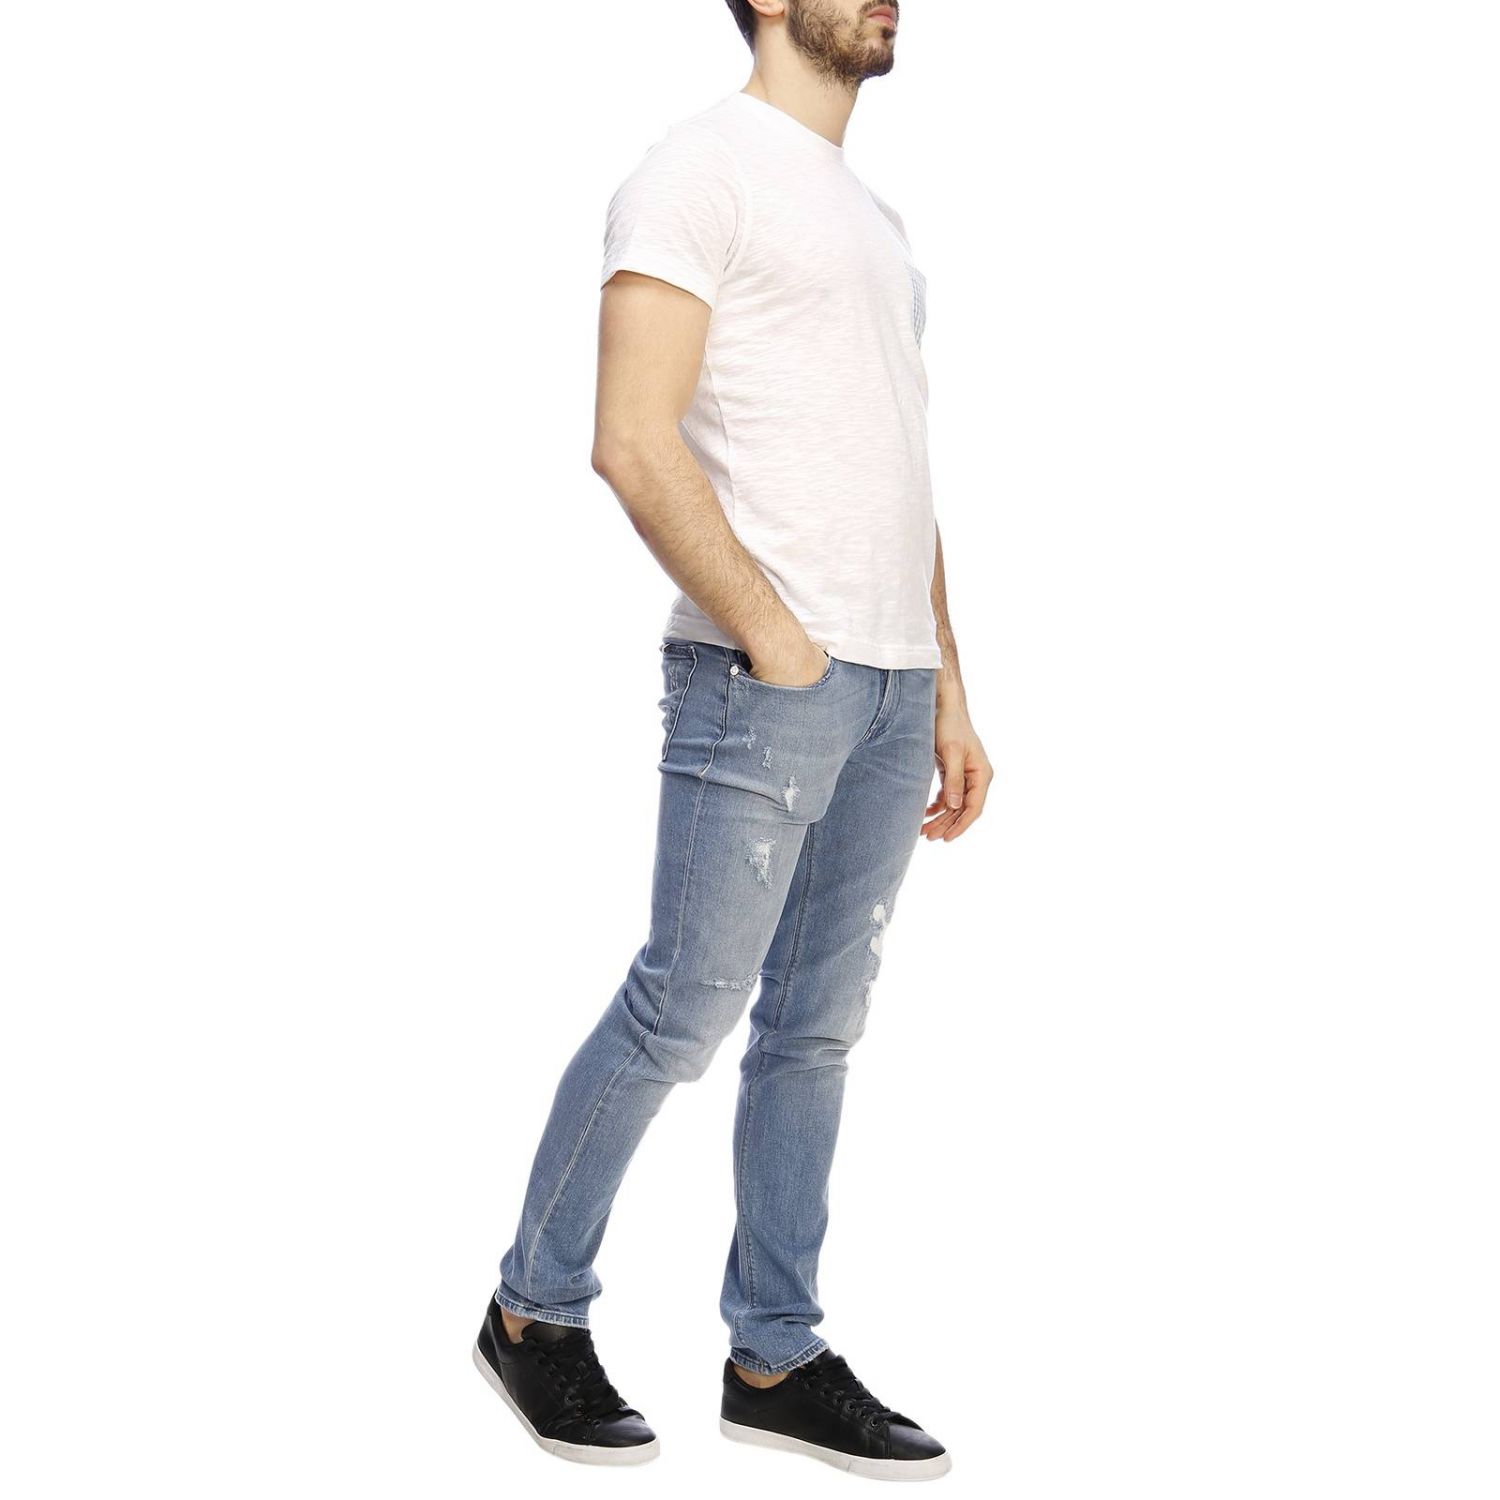 Brooks Brothers Outlet: T-shirt man - White | Brooks Brothers T-Shirt ...